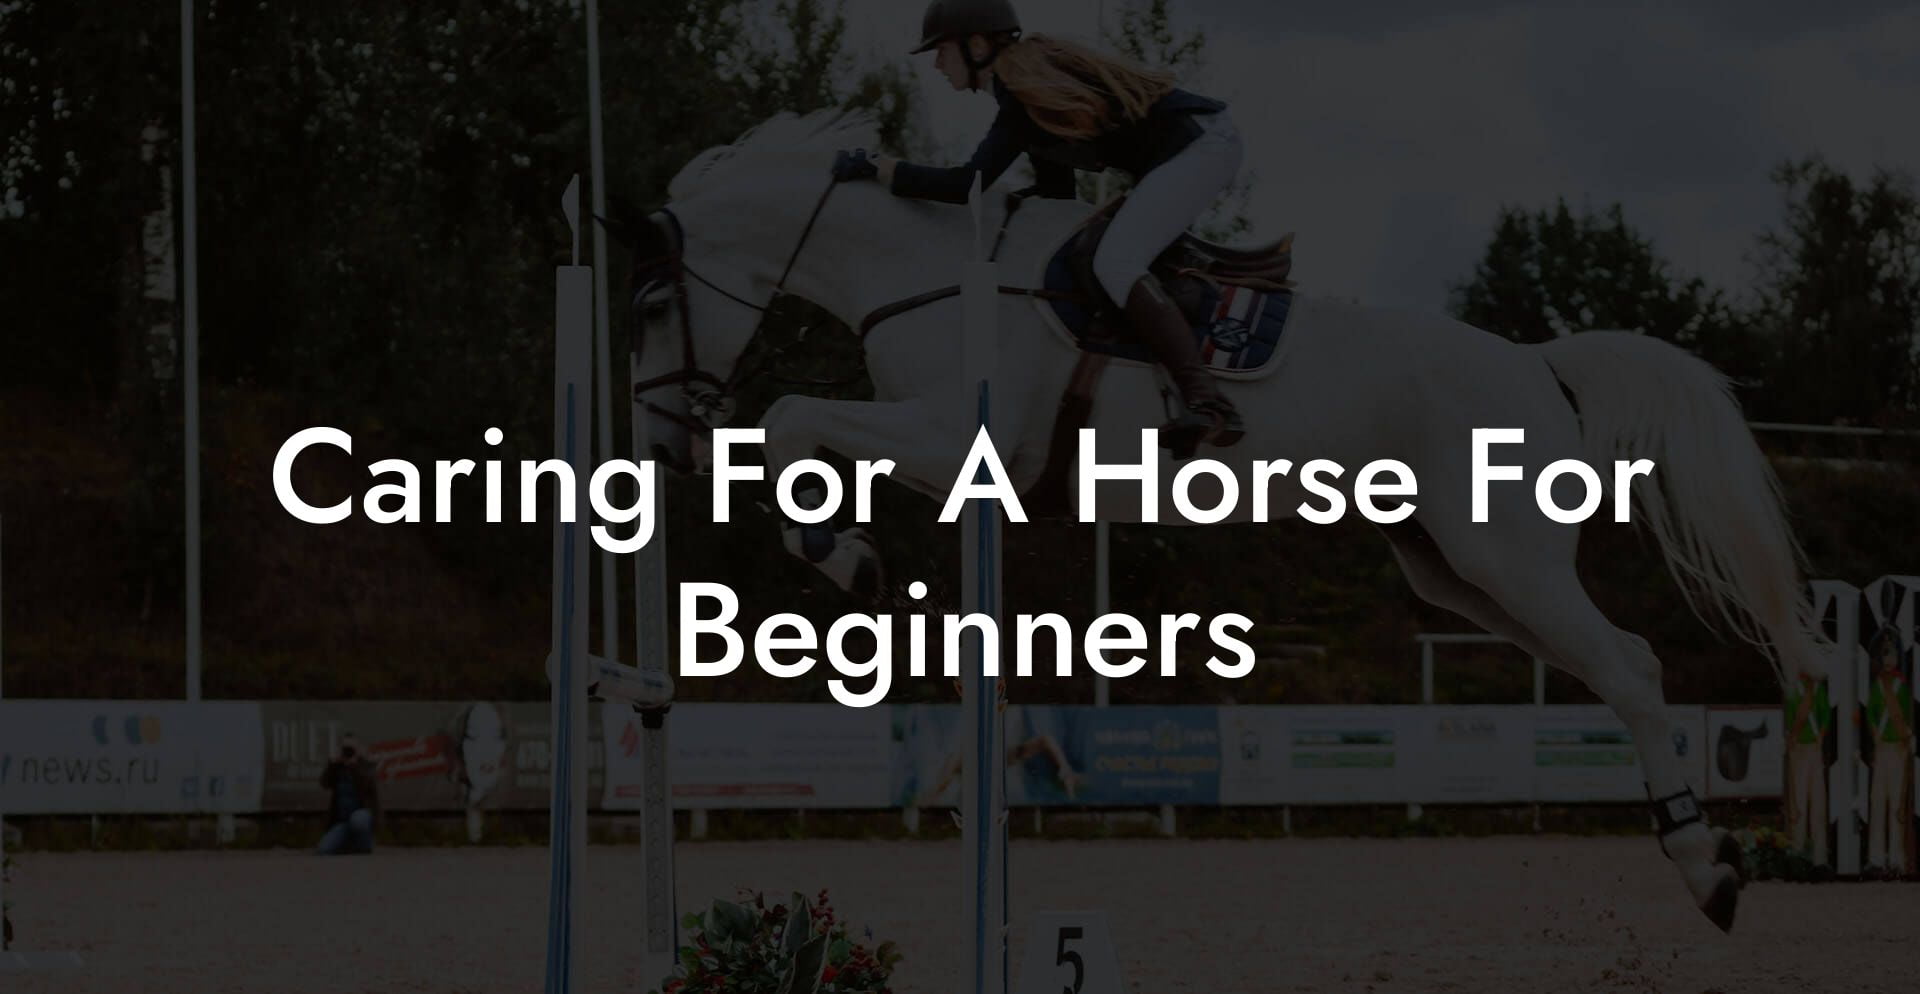 Caring For A Horse For Beginners